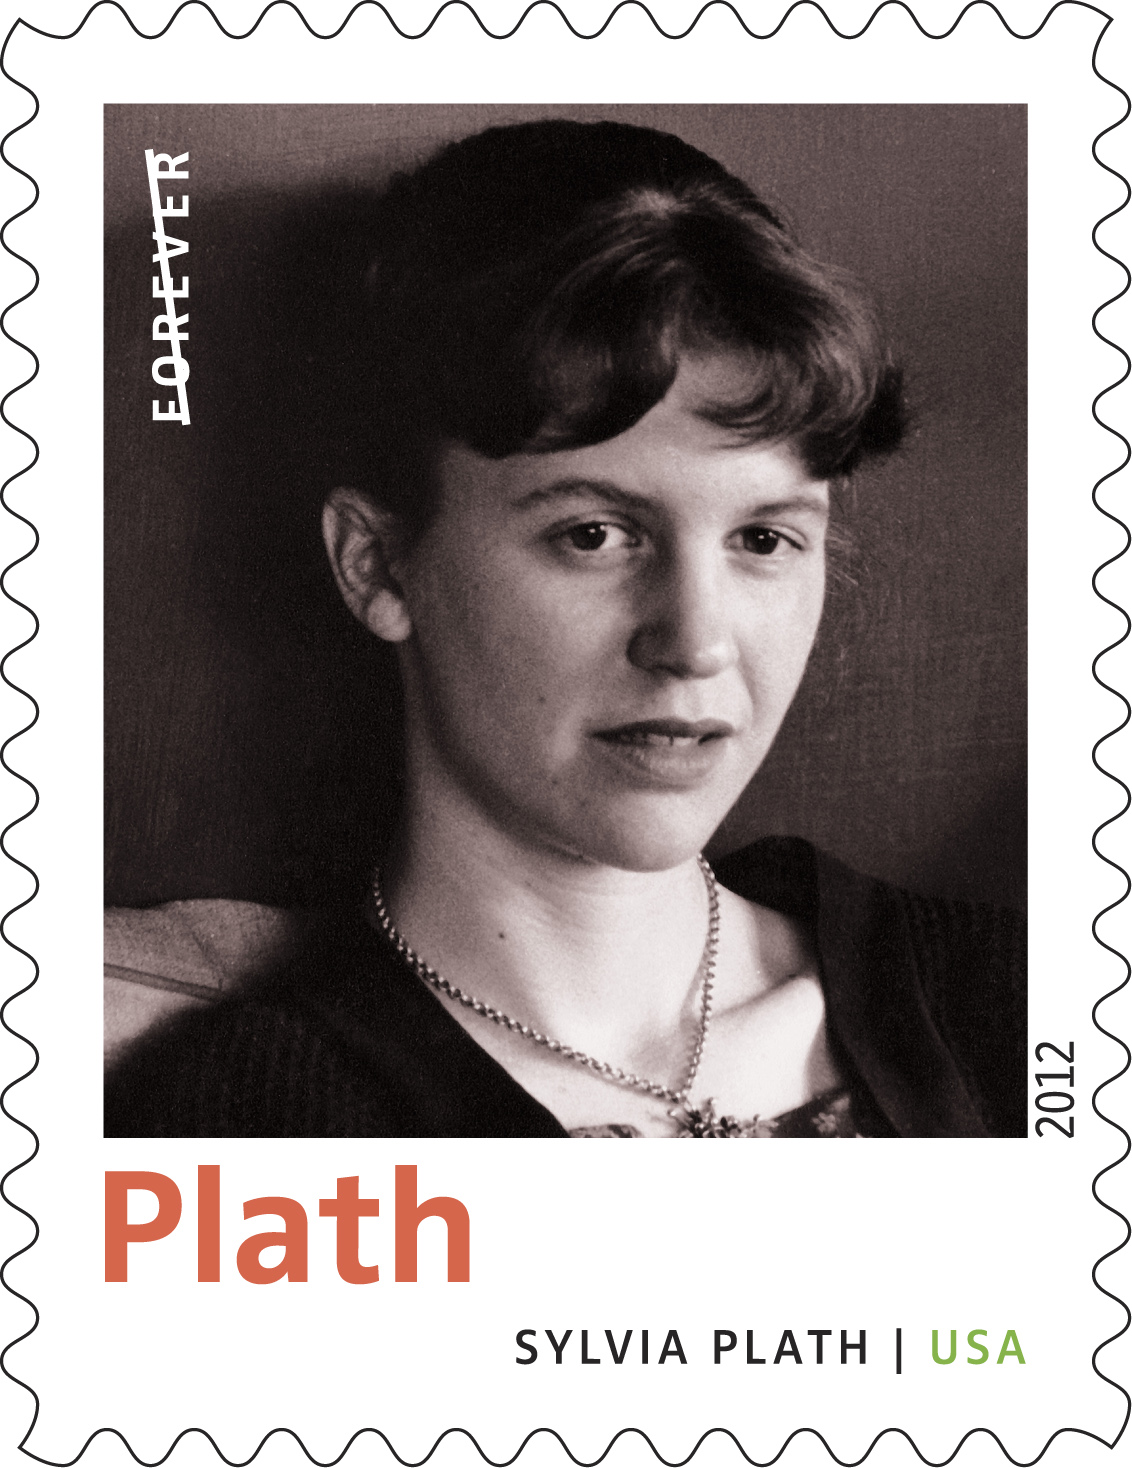 What is Sylvia Plath's writing style?